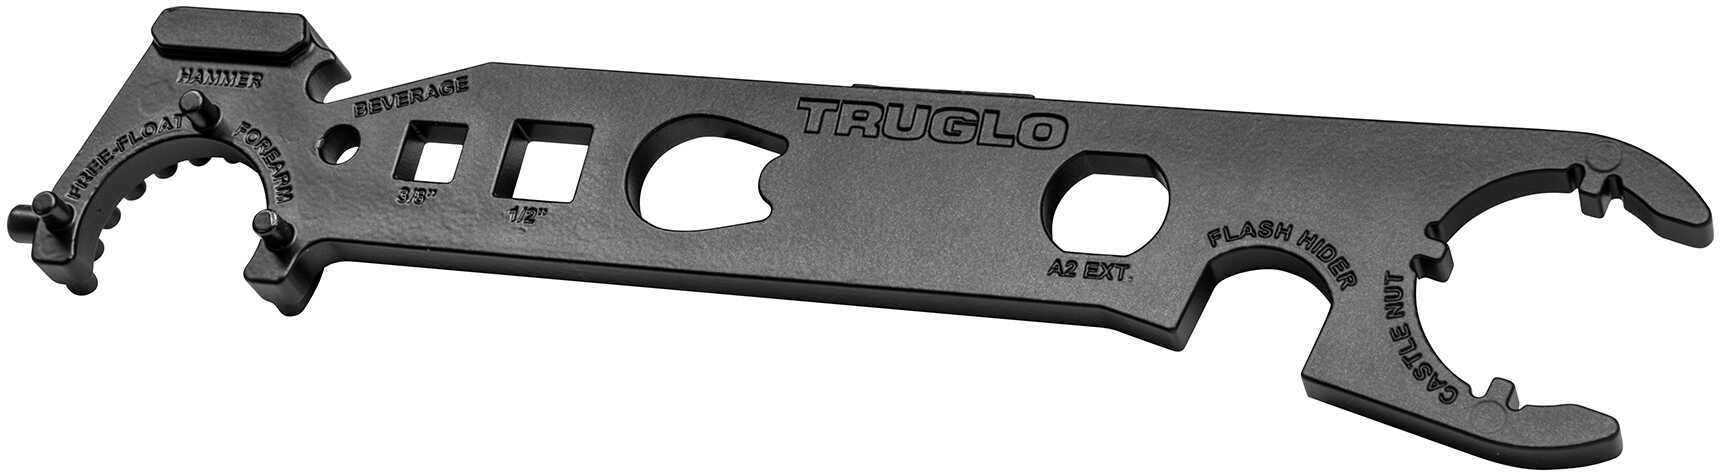 Truglo ArmorersS Wrench Multi-Tool-img-1